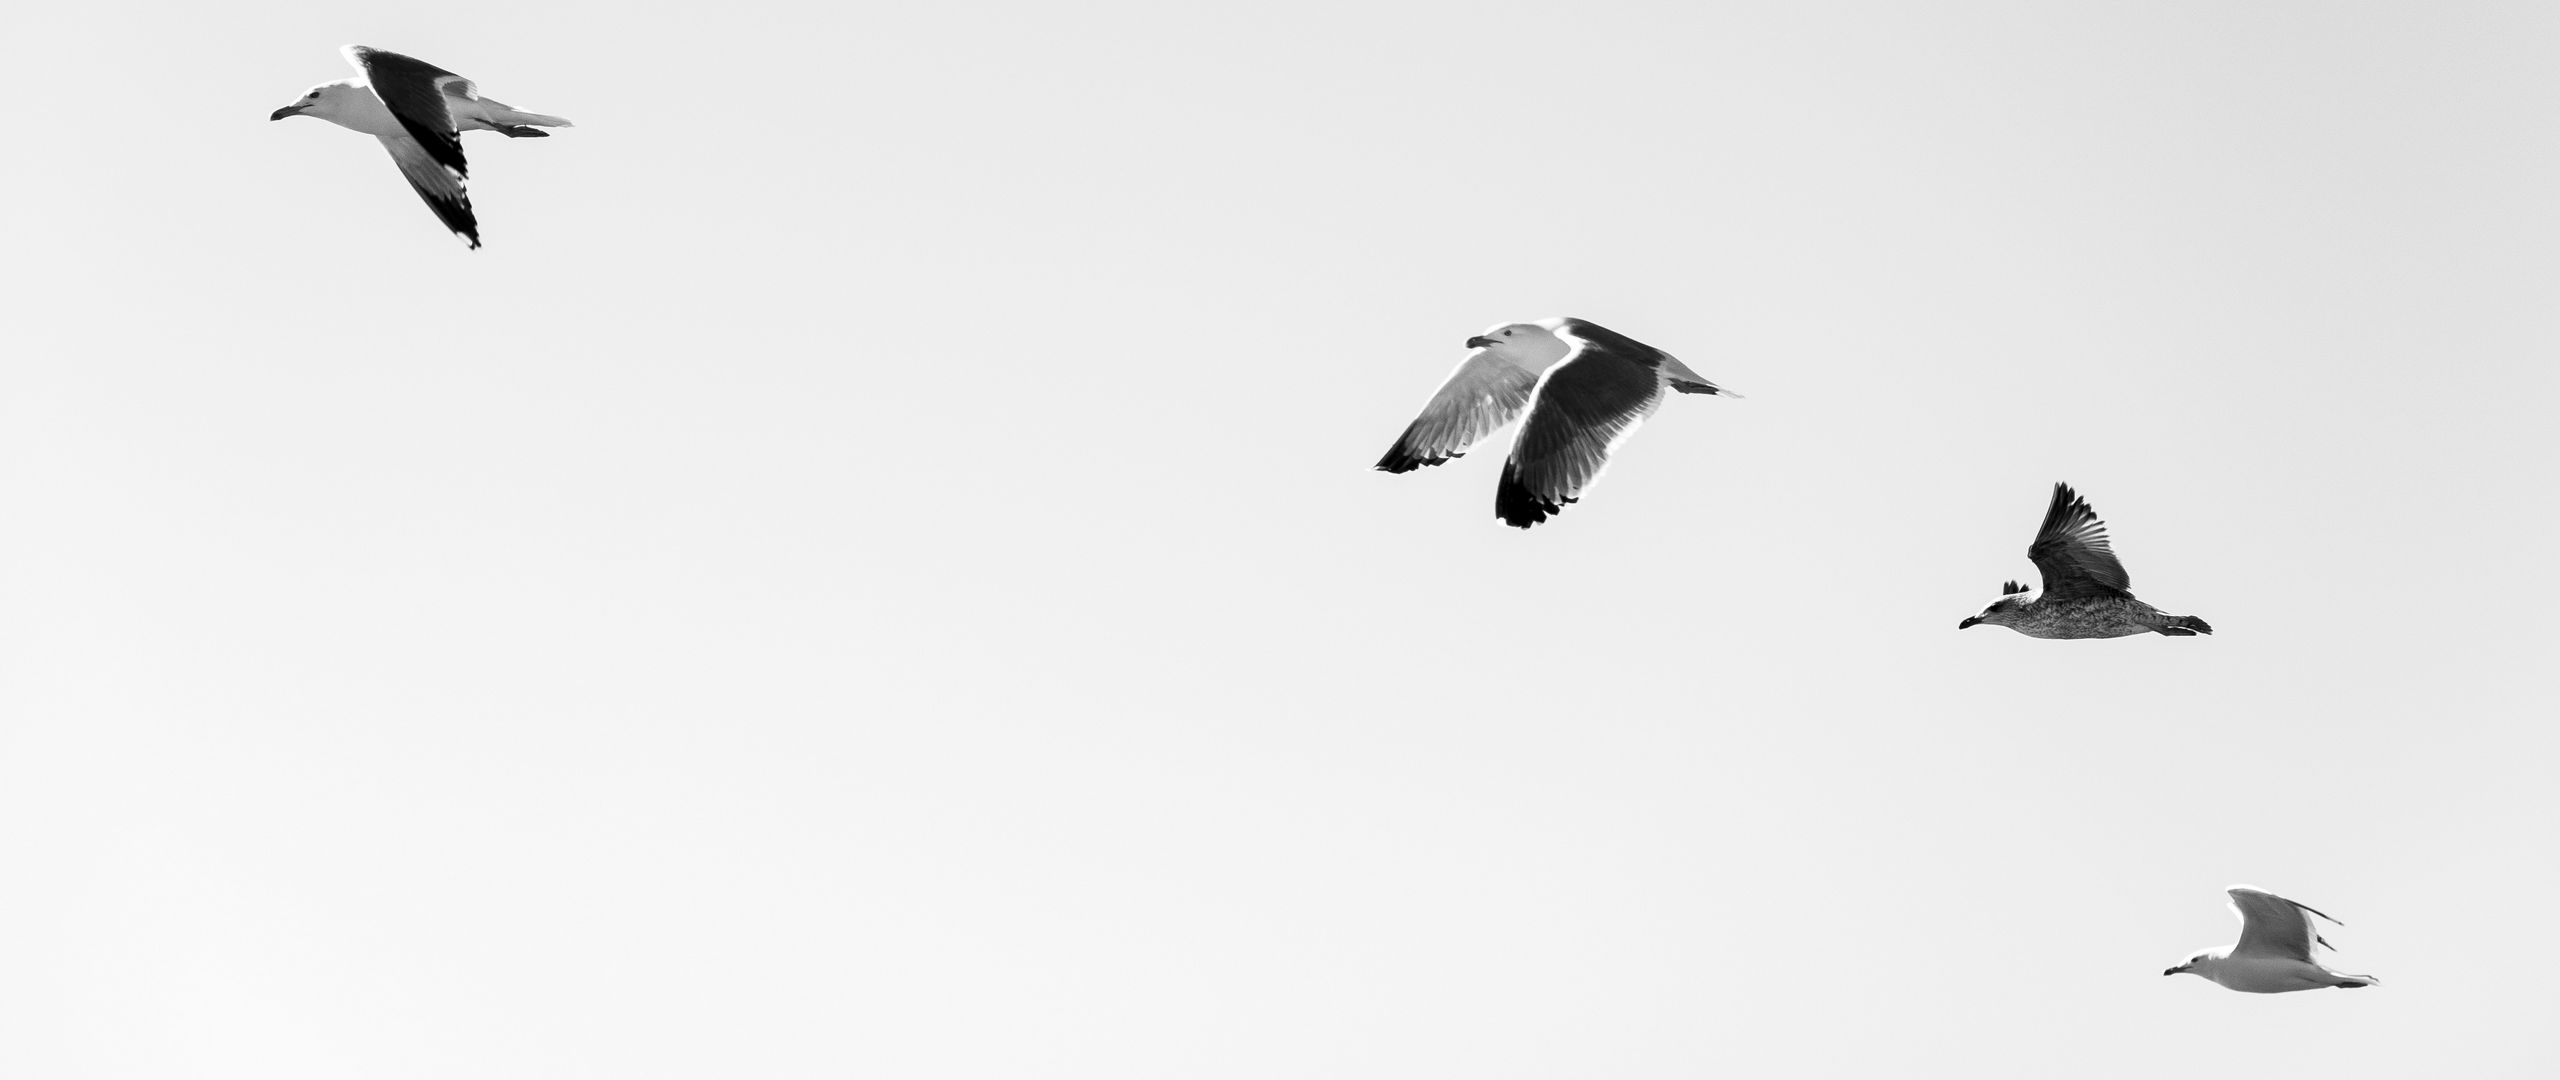 Download wallpaper 2560x1080 seagulls, birds, flying, sky dual wide 1080p HD background